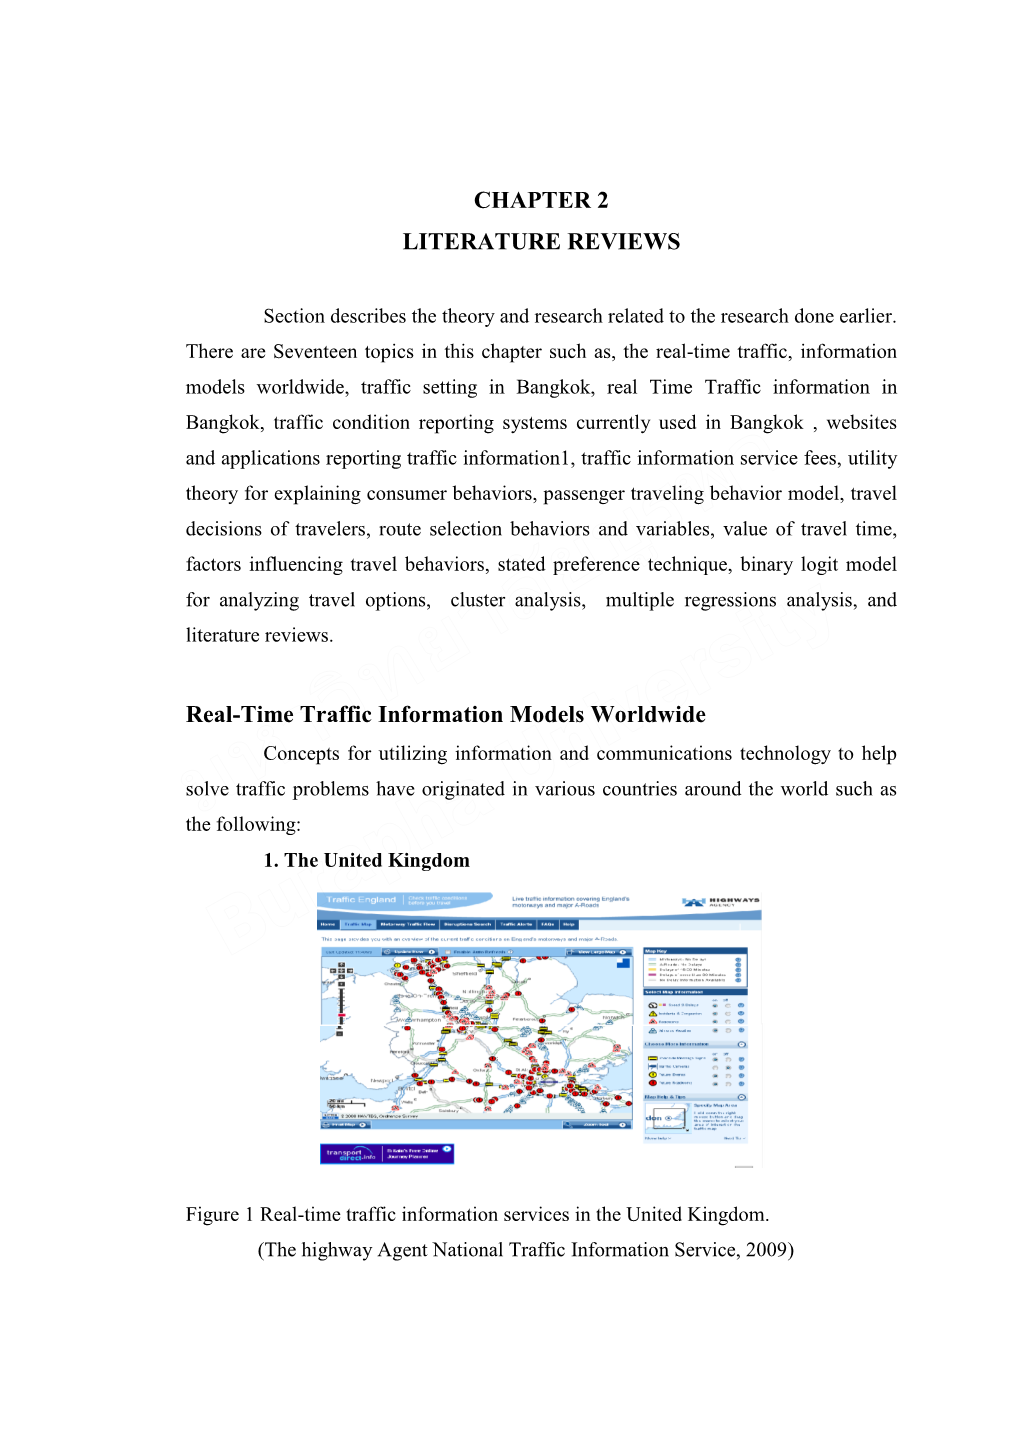 CHAPTER 2 LITERATURE REVIEWS Real-Time Traffic Information